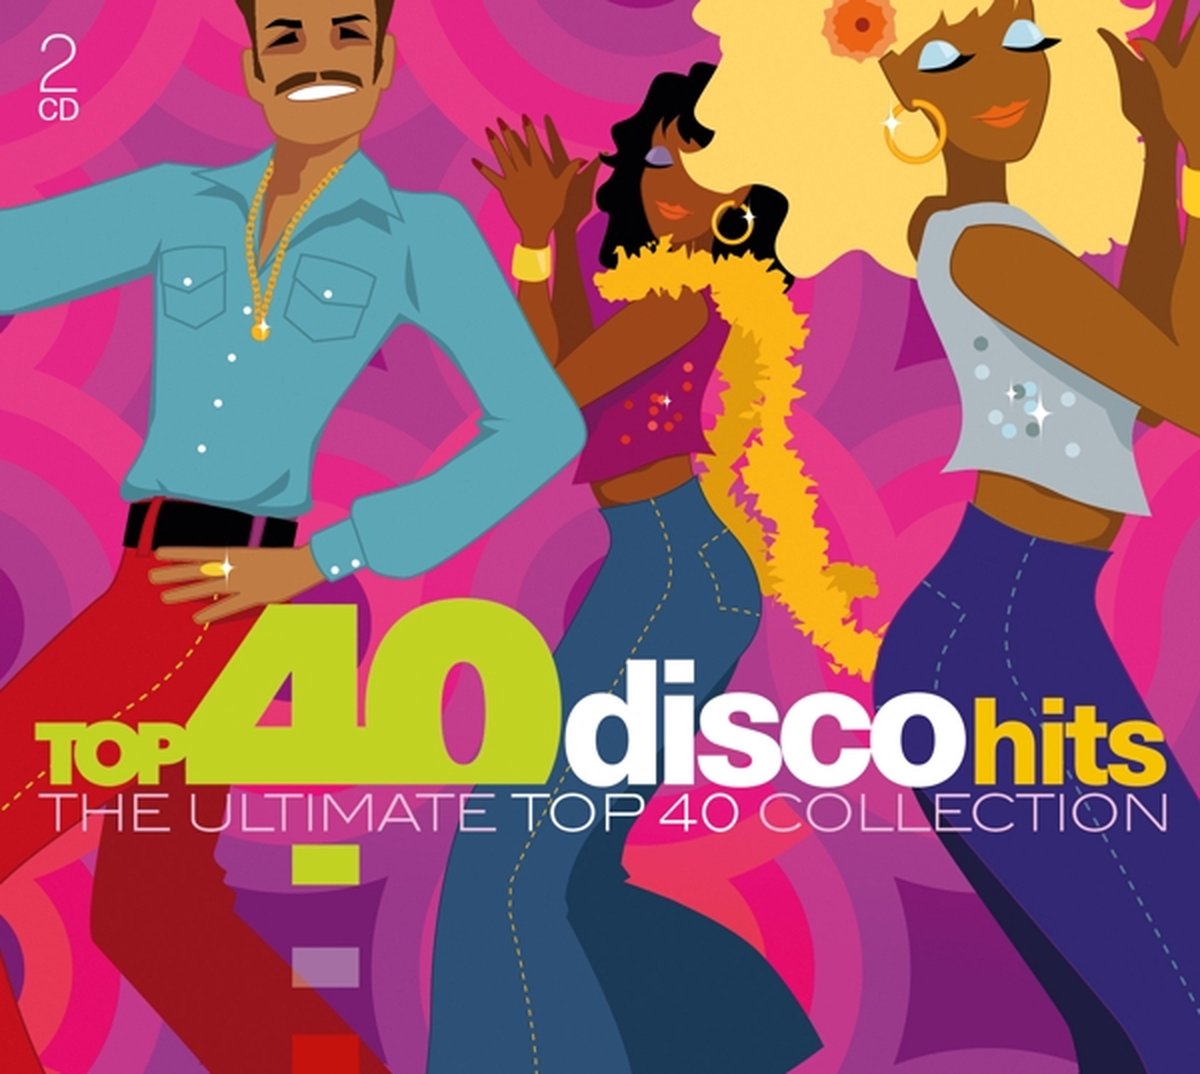 Top 40 Disco Hits The Ultimate Top 40 Collection